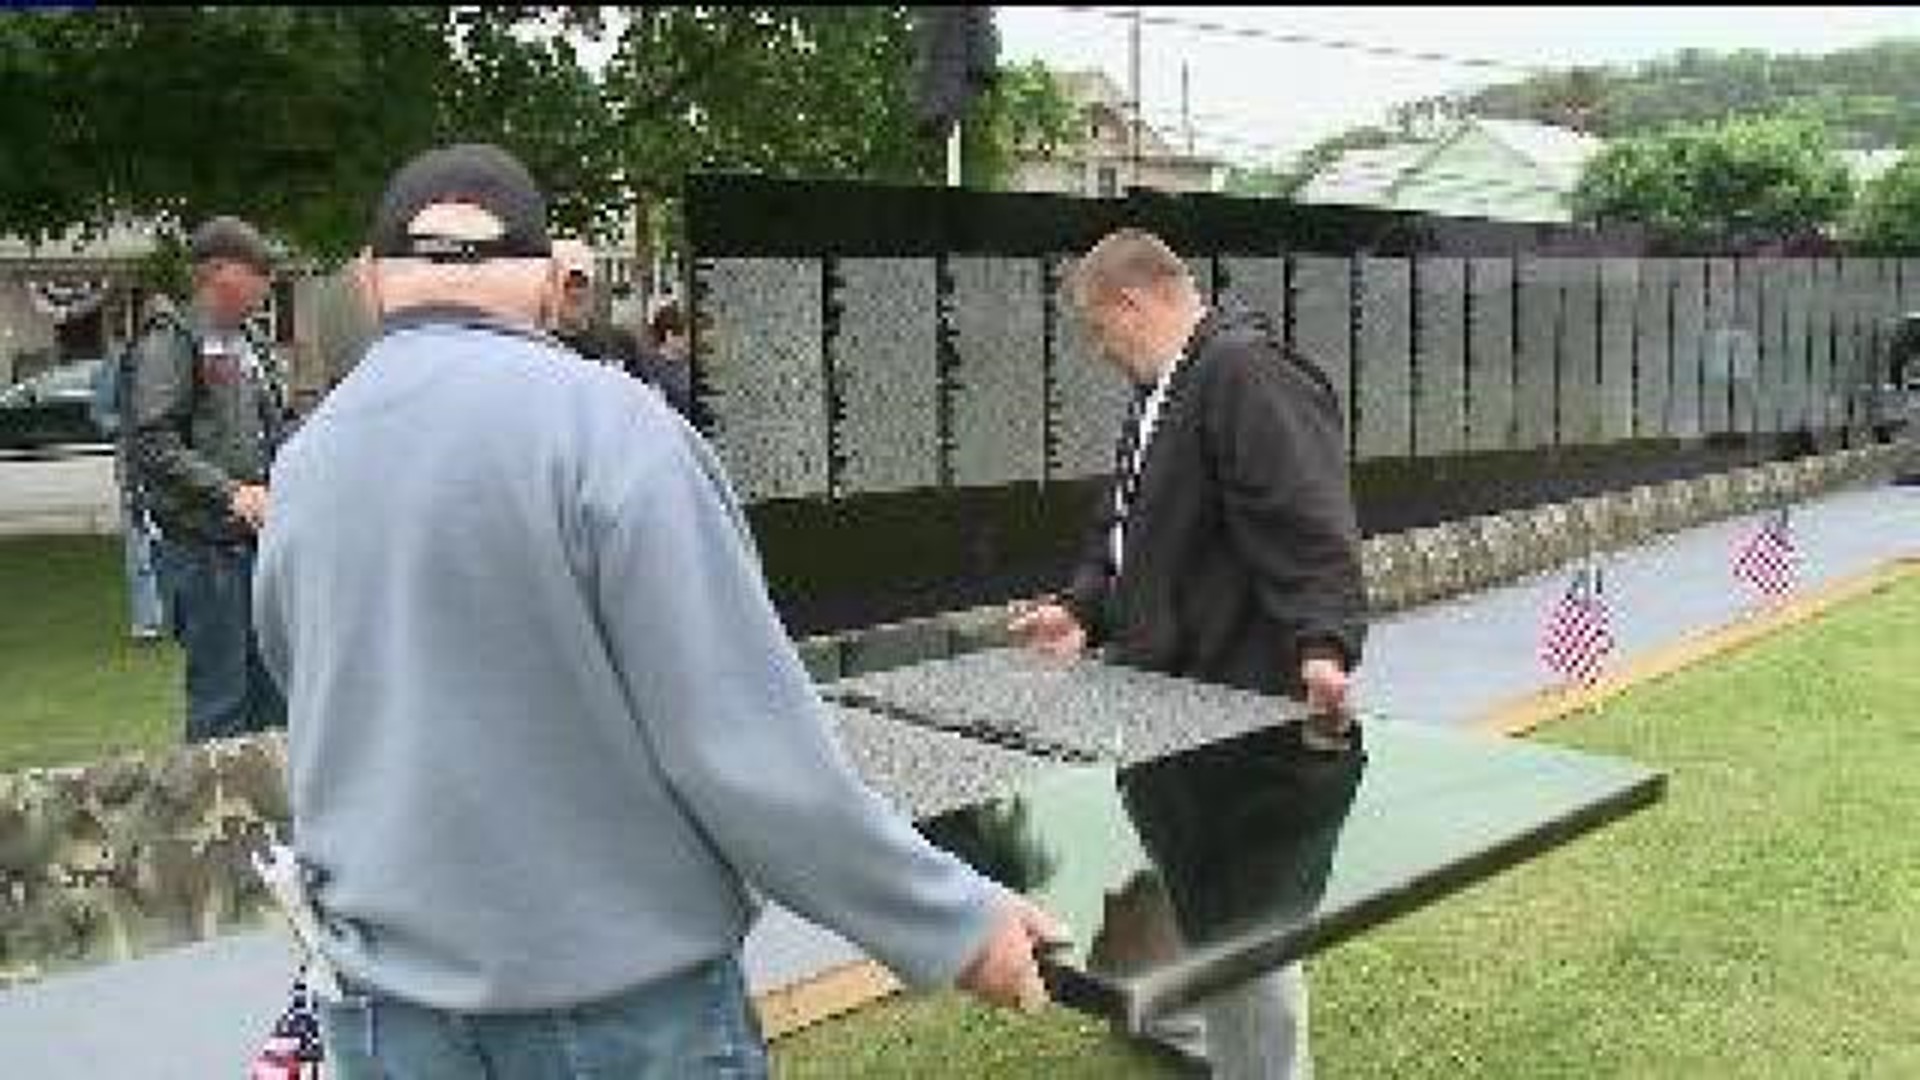 Vietnam Memorial Moving Wall Comes to Coal Township